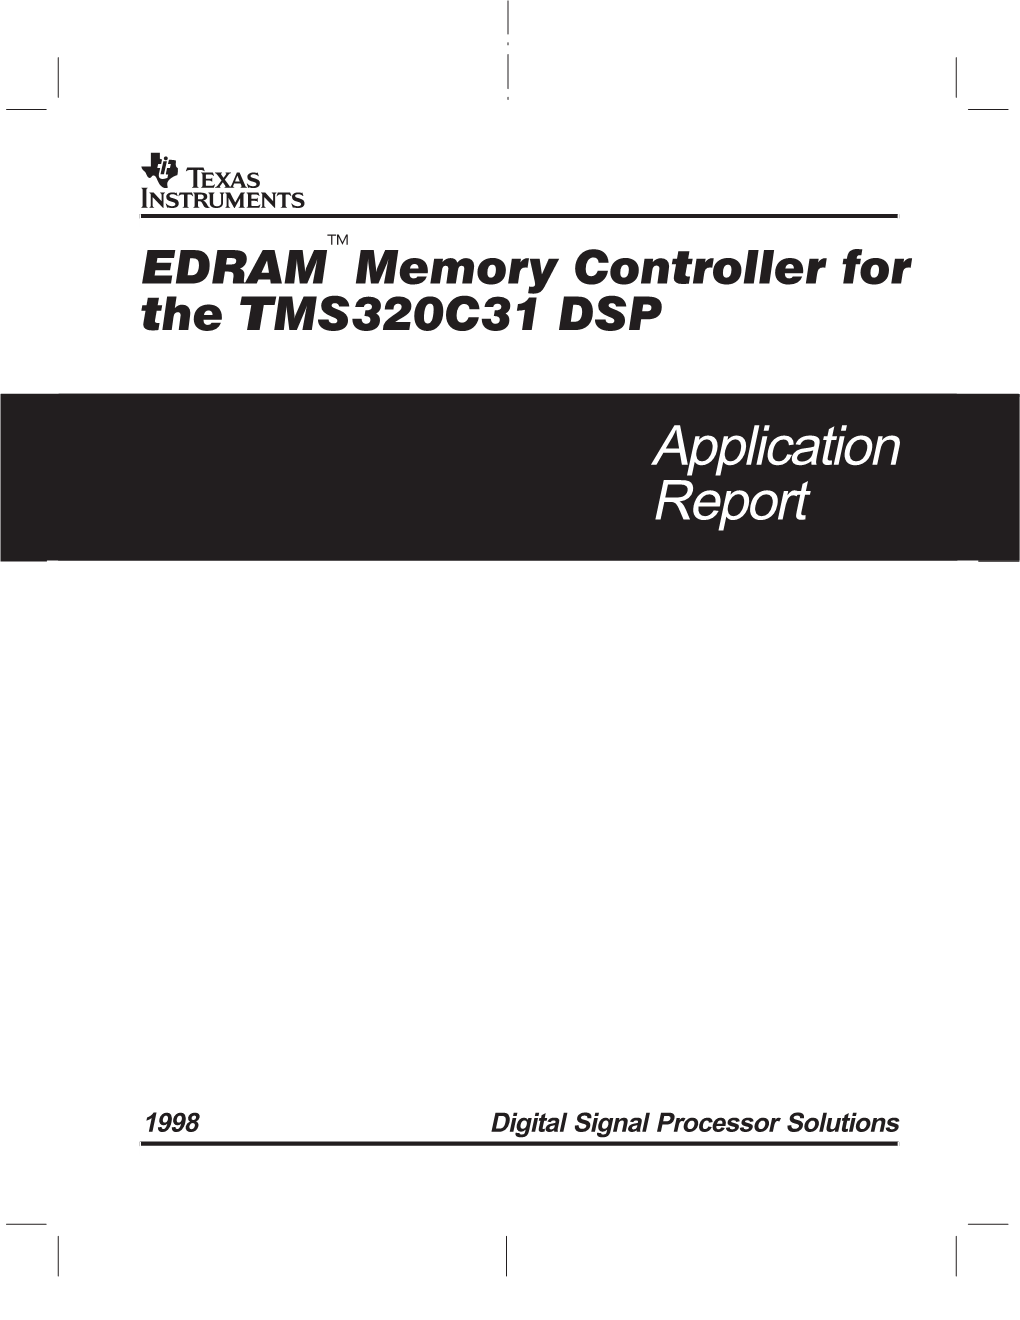 EDRAM Memory Controller for the TMS320C31 DSP Application Report